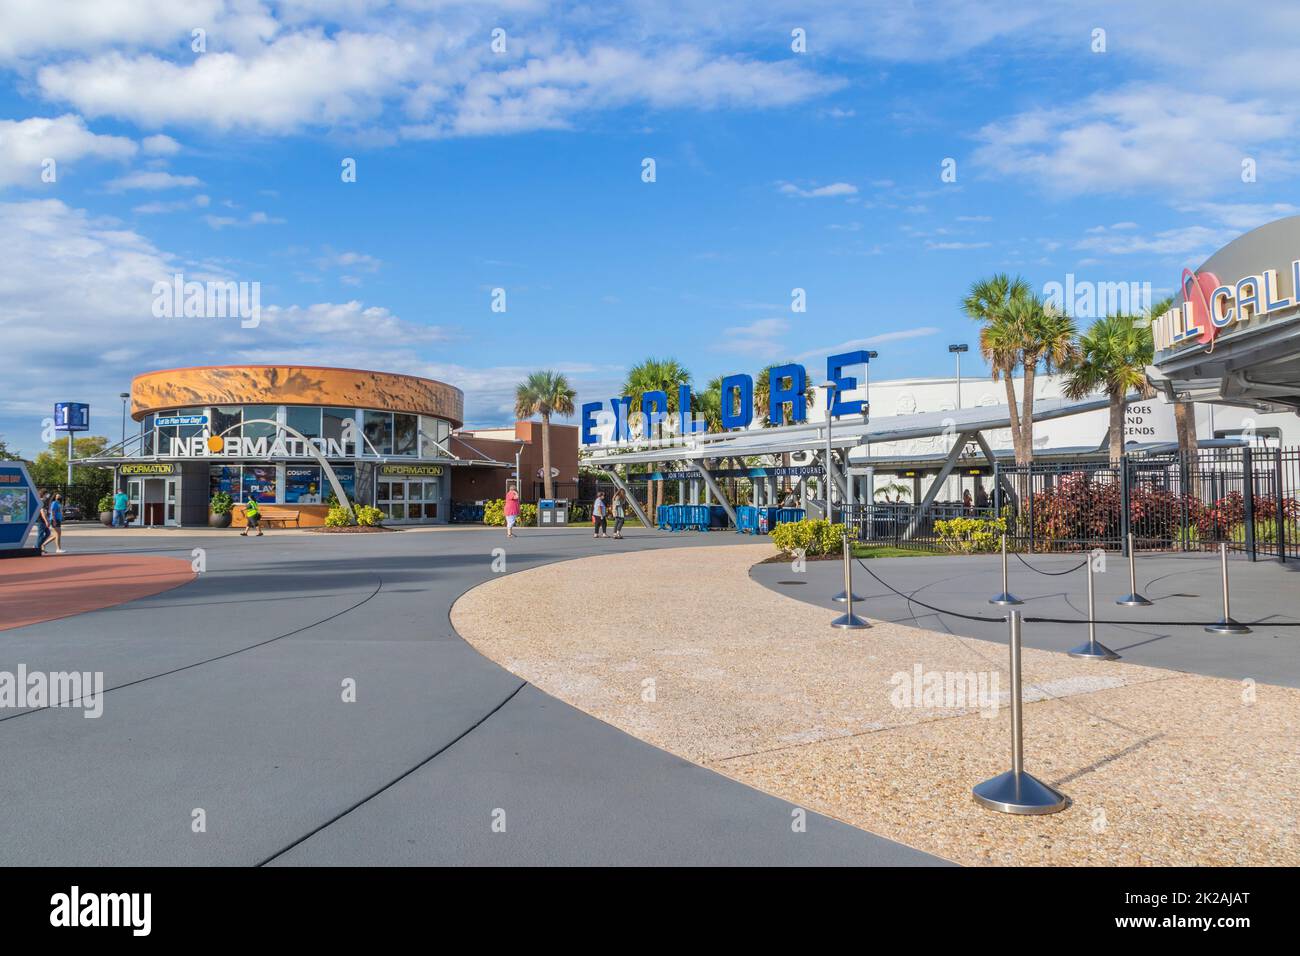 Kennedy Space Center Visitor Complex in Florida. Stock Photo